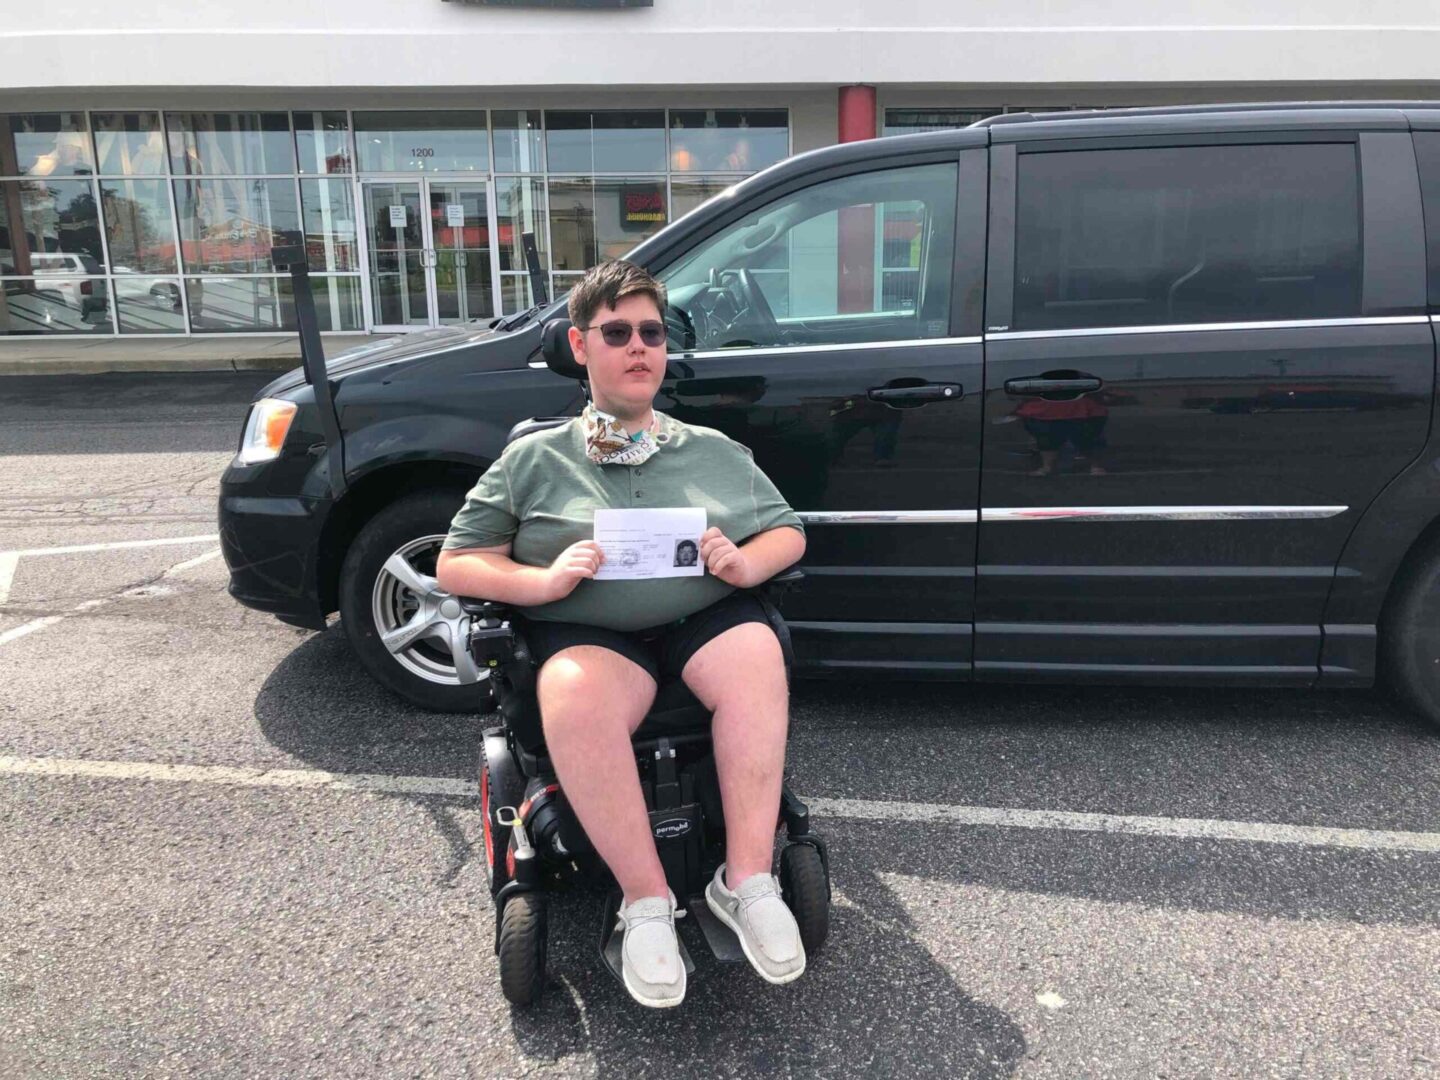 A person sitting in a wheelchair and holding a sign